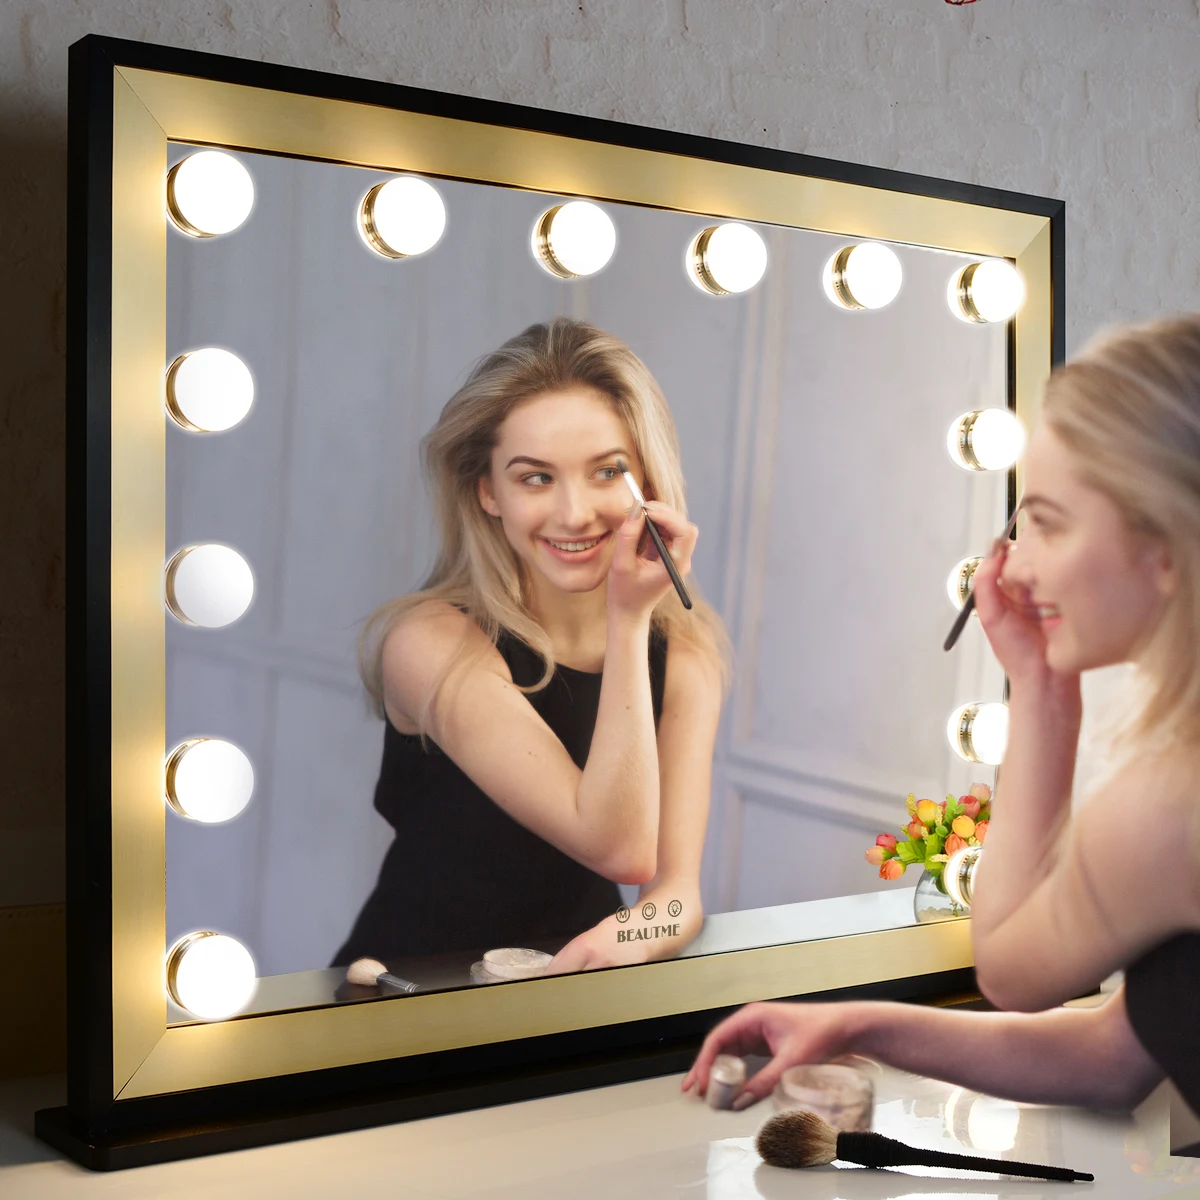 

BEAUTME Vanity Mirror Makeup Mirror with Lights,Large Hollywood Lighted Vanity Mirror with 14 Dimmable LED Bulbs,3 Color Modes